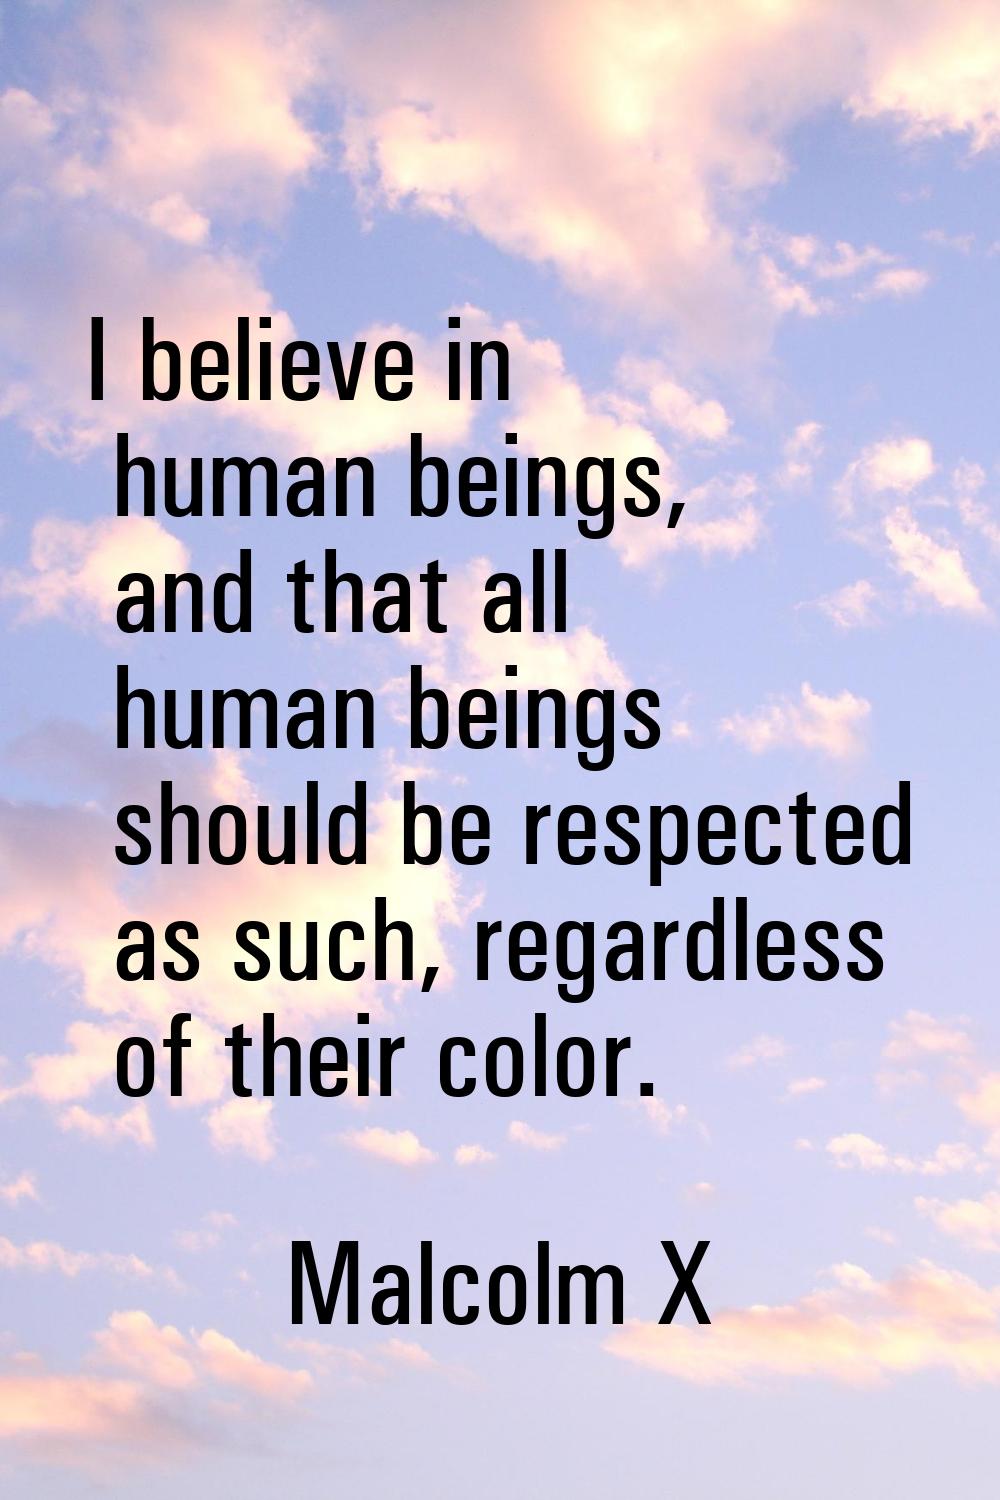 I believe in human beings, and that all human beings should be respected as such, regardless of the